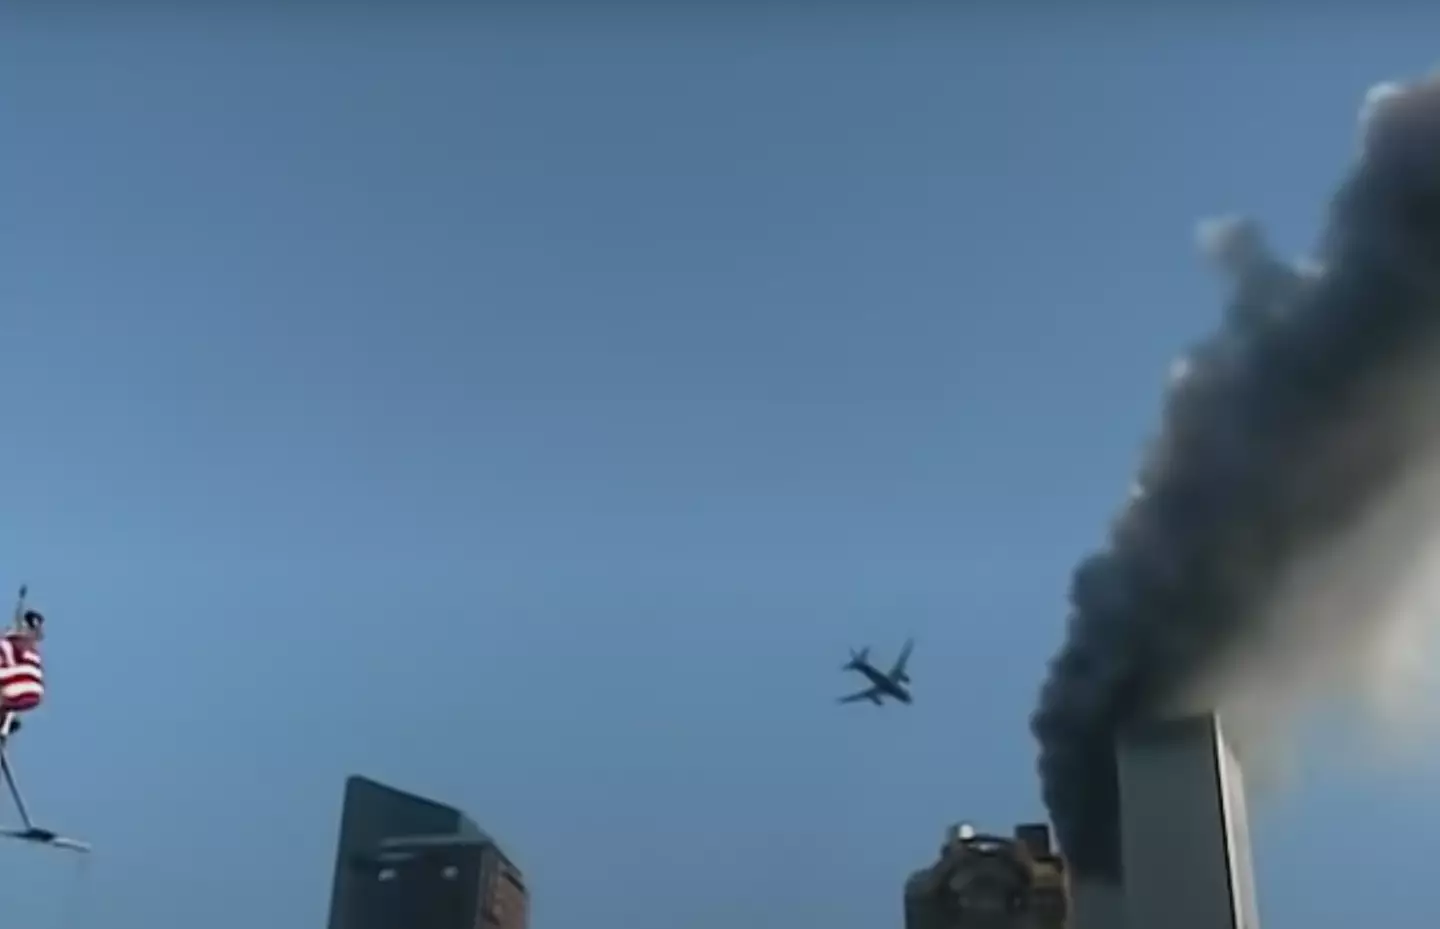 The never before seen clip reveals a horrifying angle of the events of September 11.